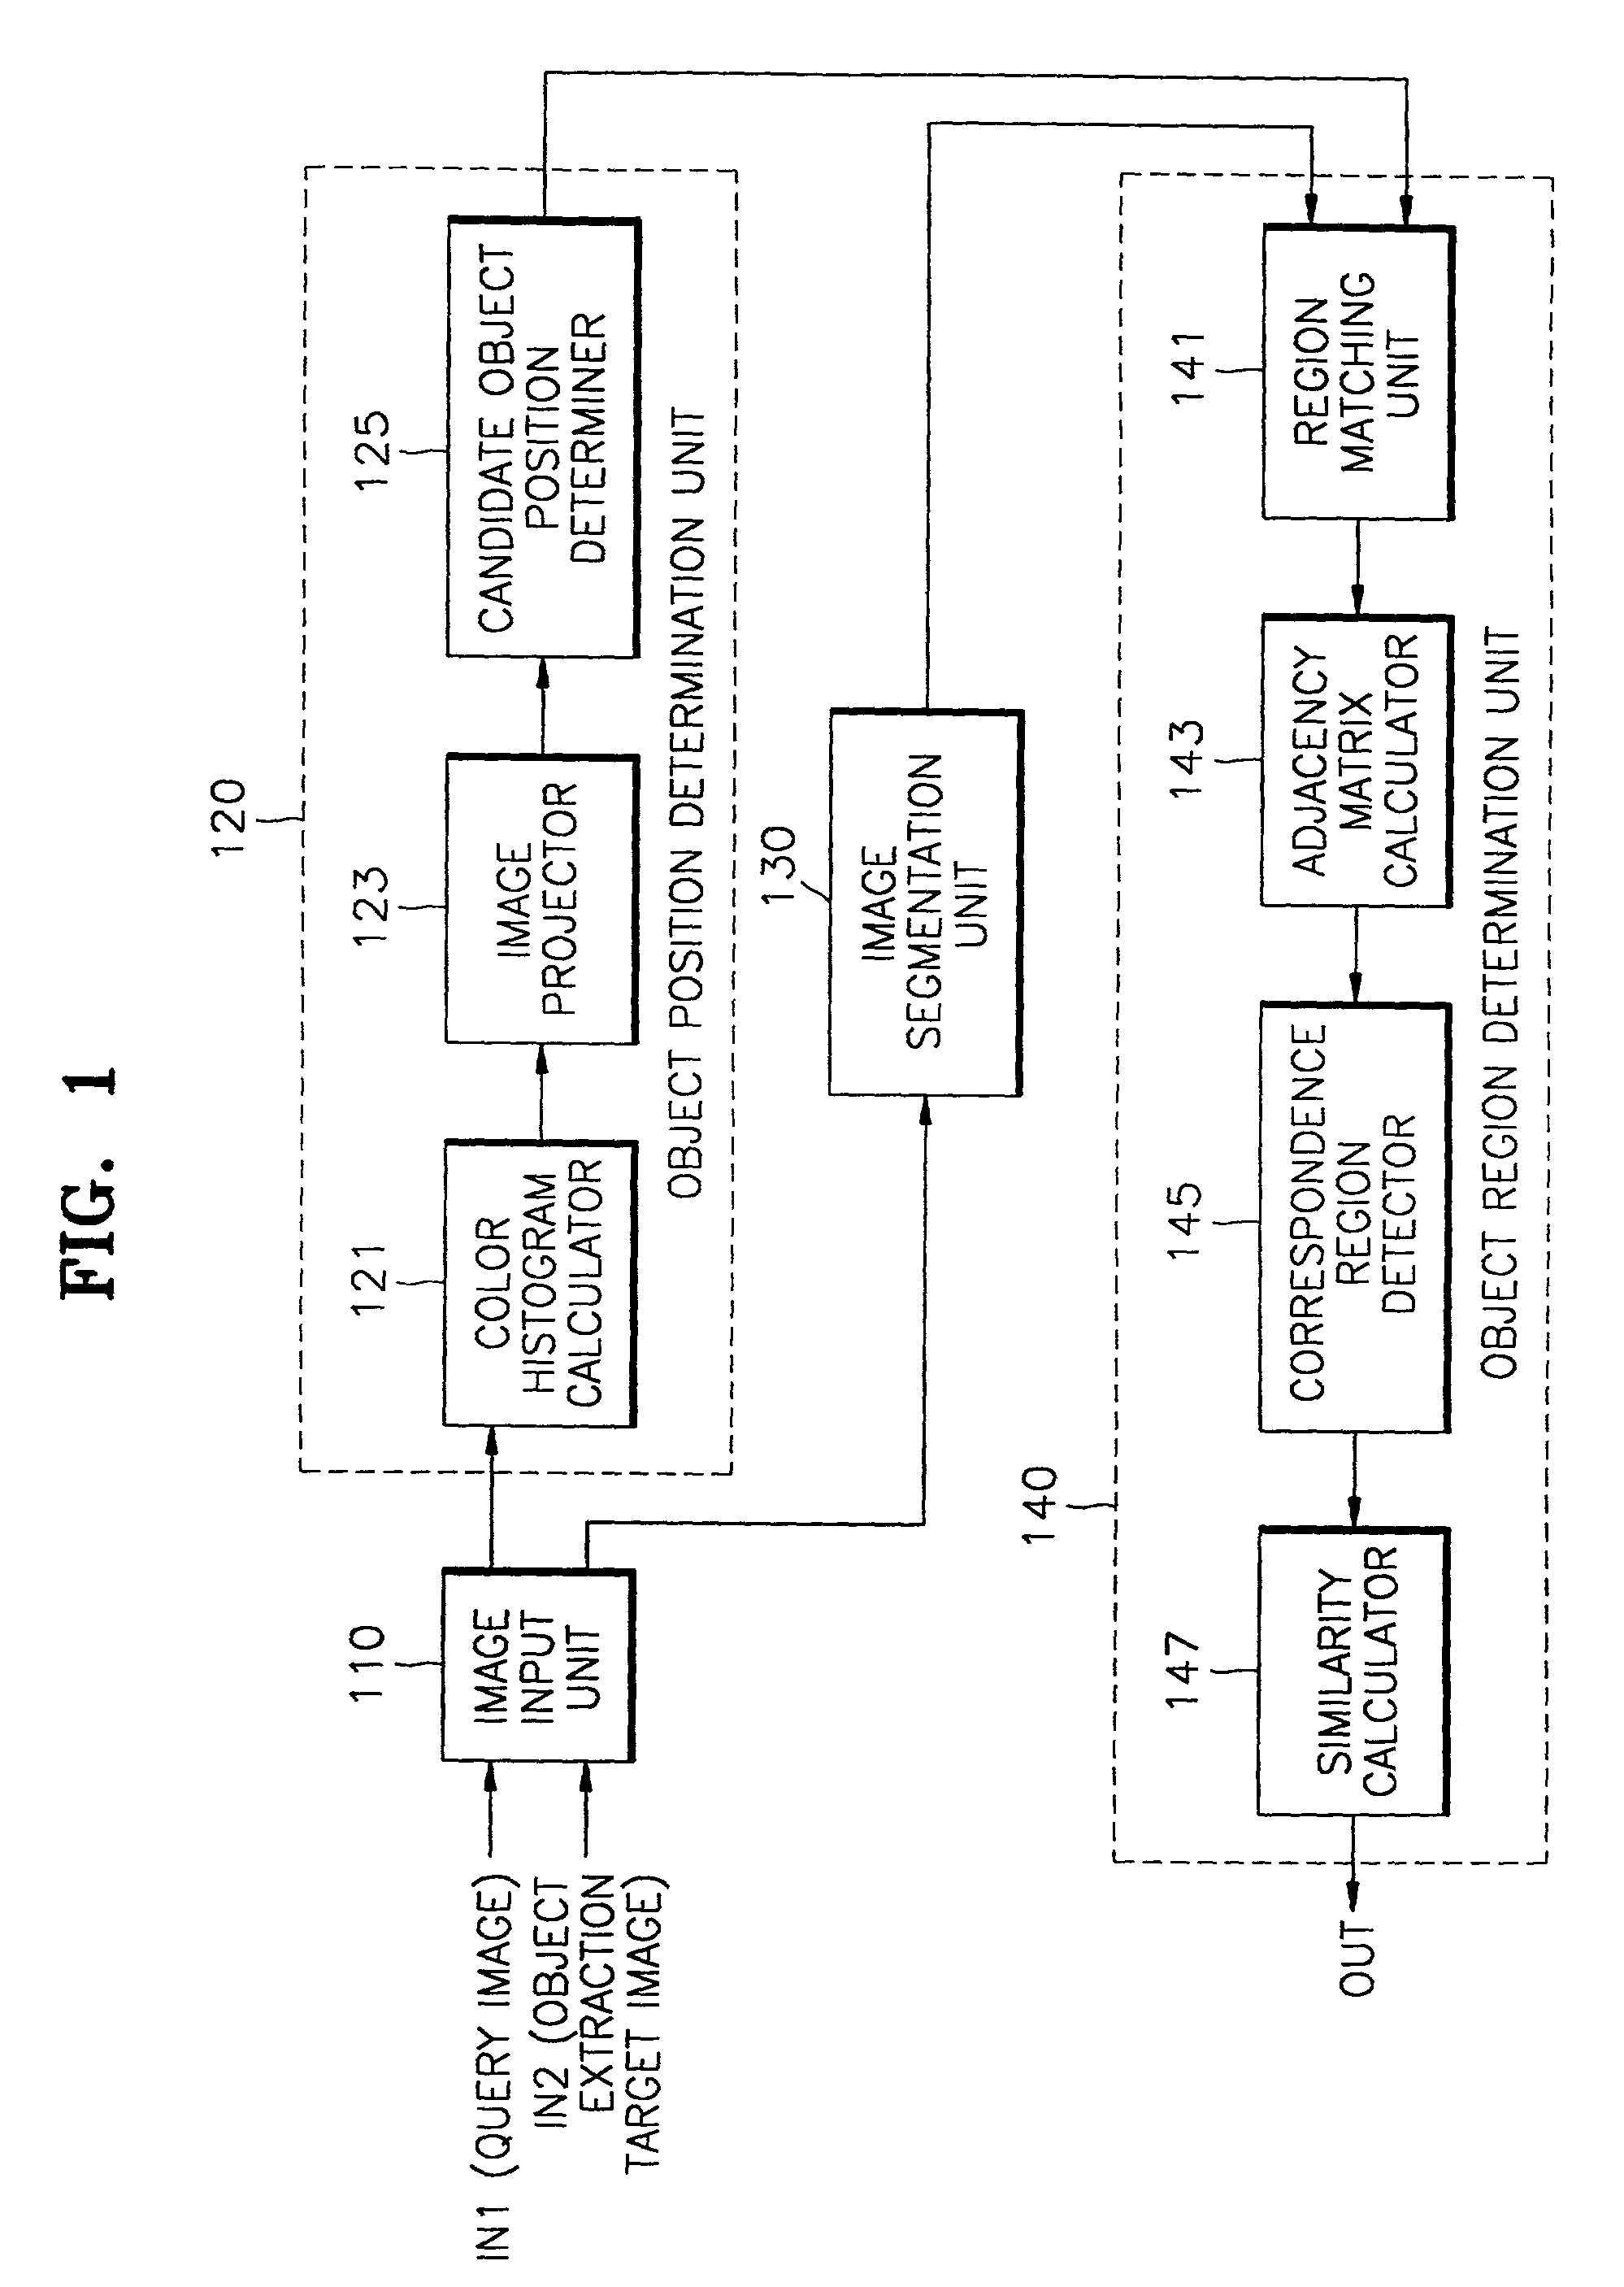 Apparatus and method for extracting object based on feature matching between segmented regions in images